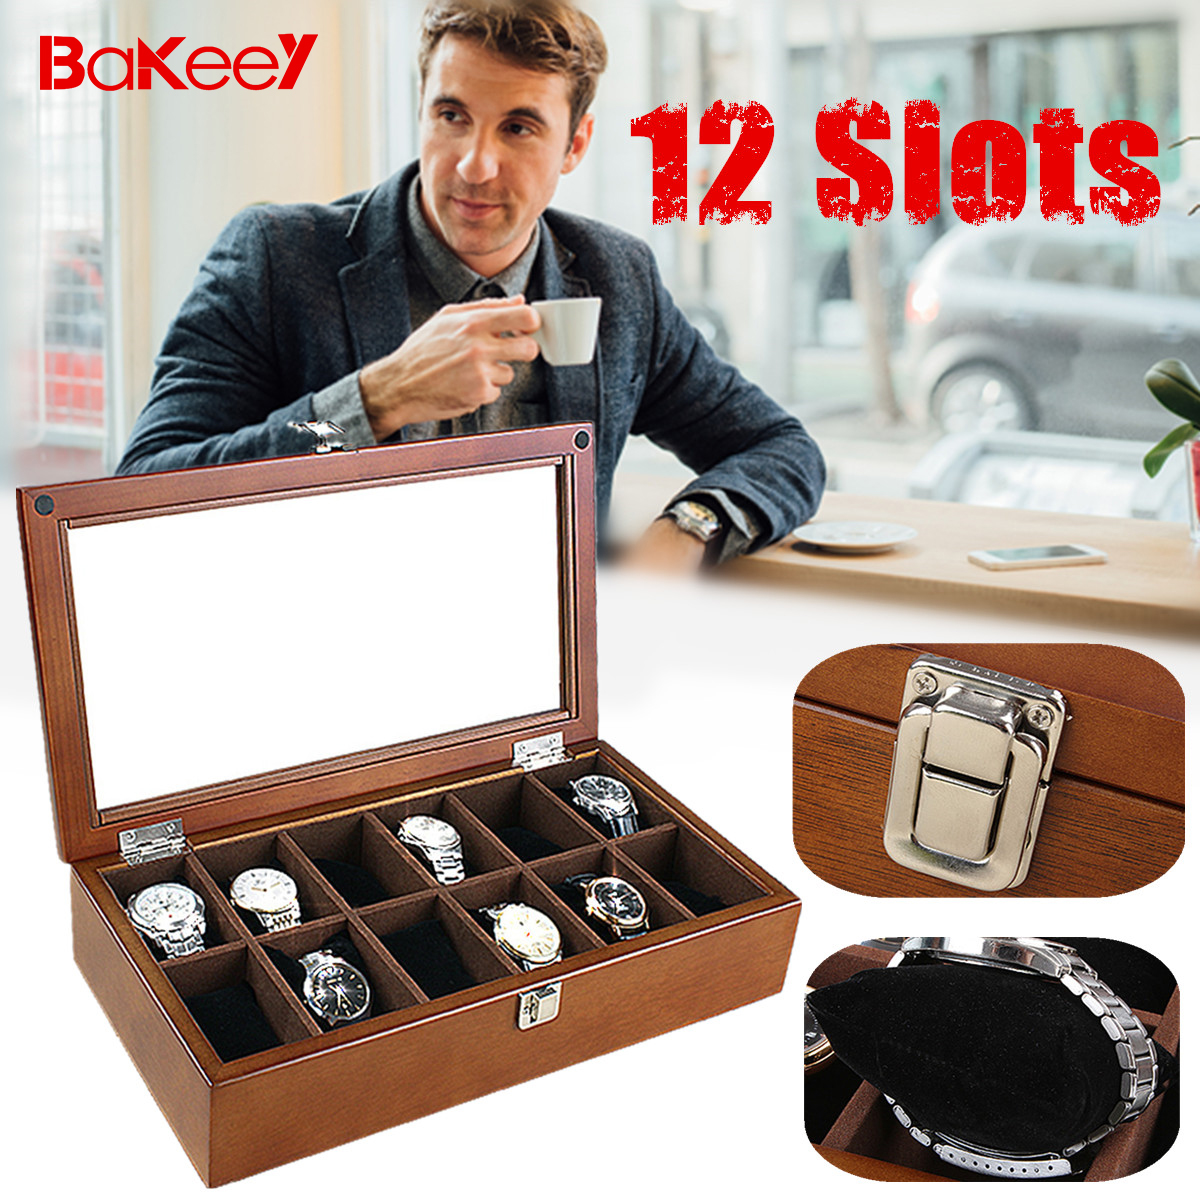 Bakeey-12-Slots-Wooden-with-Skylight-Watch-Box-Jewellery-Display-Collection-Storage-Box-1654309-1